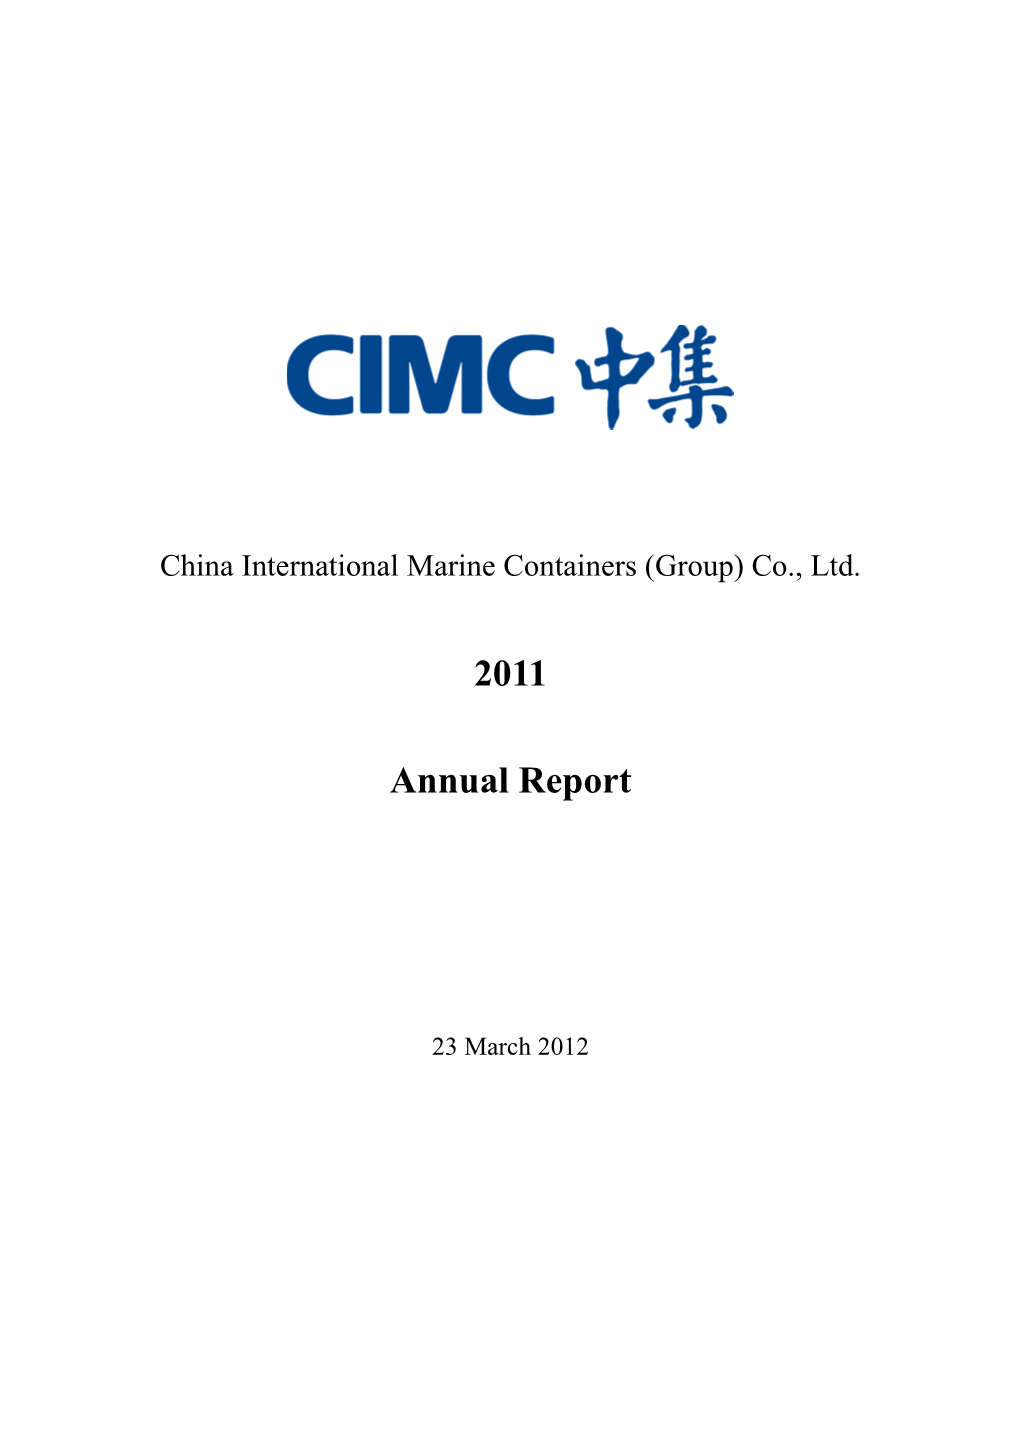 China International Marine Containers (Group) Co., Ltd